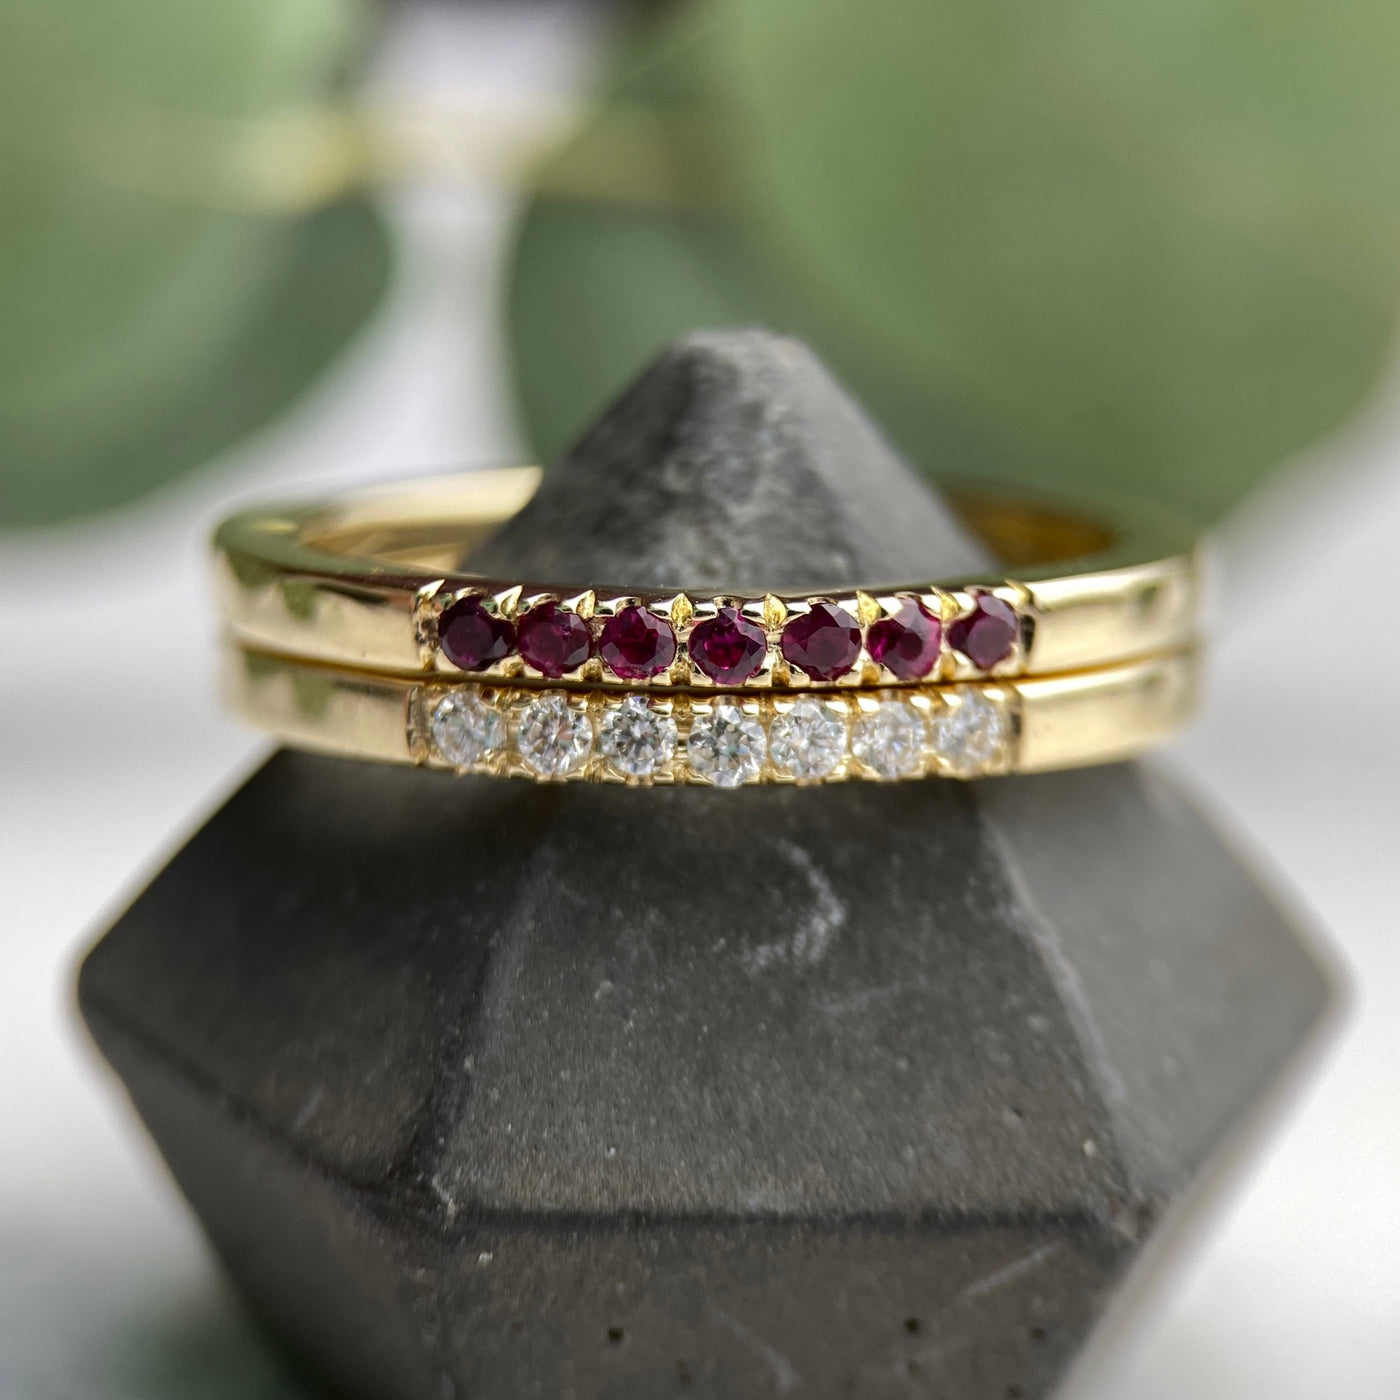 a yellow gold stacking ring measuring 2mm set with 7 round faceted ruby stones pave set into the surface of the ring, the ring is stacked on top another ring set with 7 pave set diamonds as a stacking ring set, both rings are on a grey ring stand with a white and dark red background with a few leaves in view